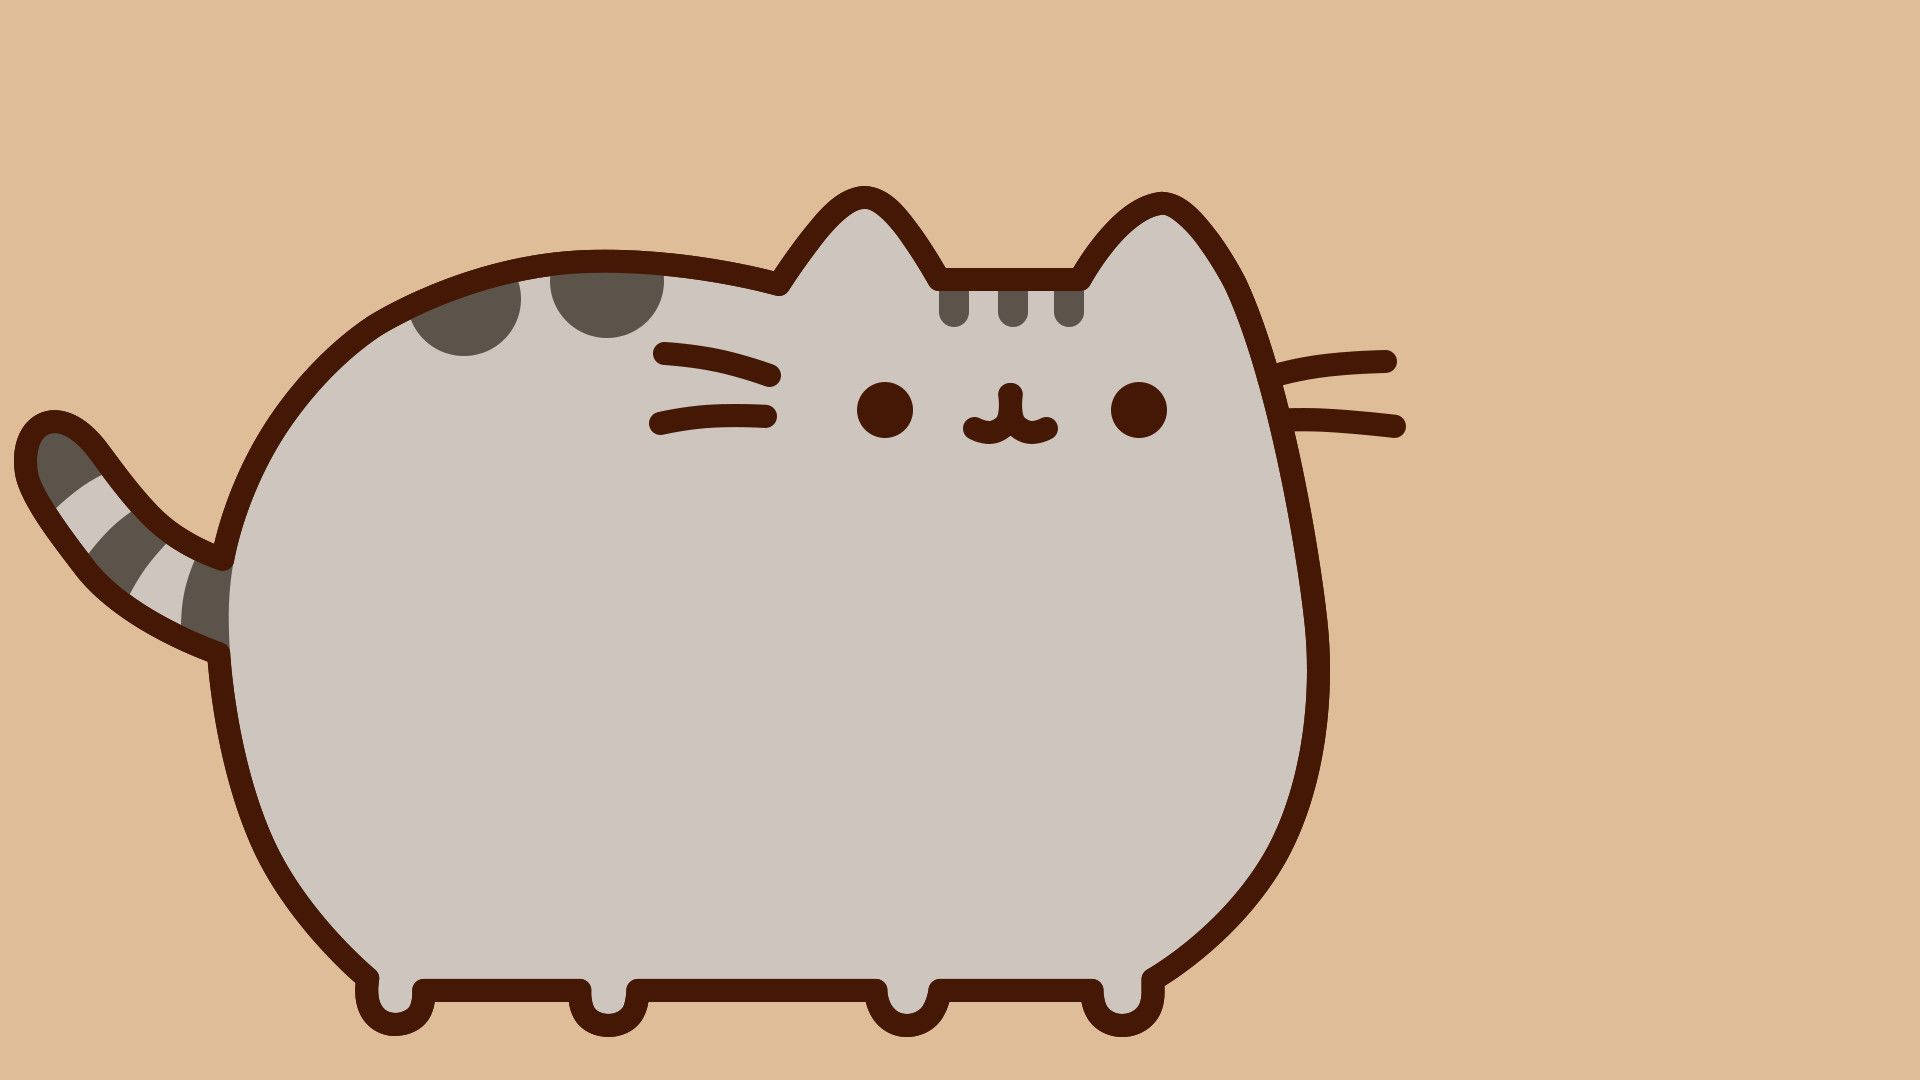 Use your imagination with Pusheen! Wallpaper